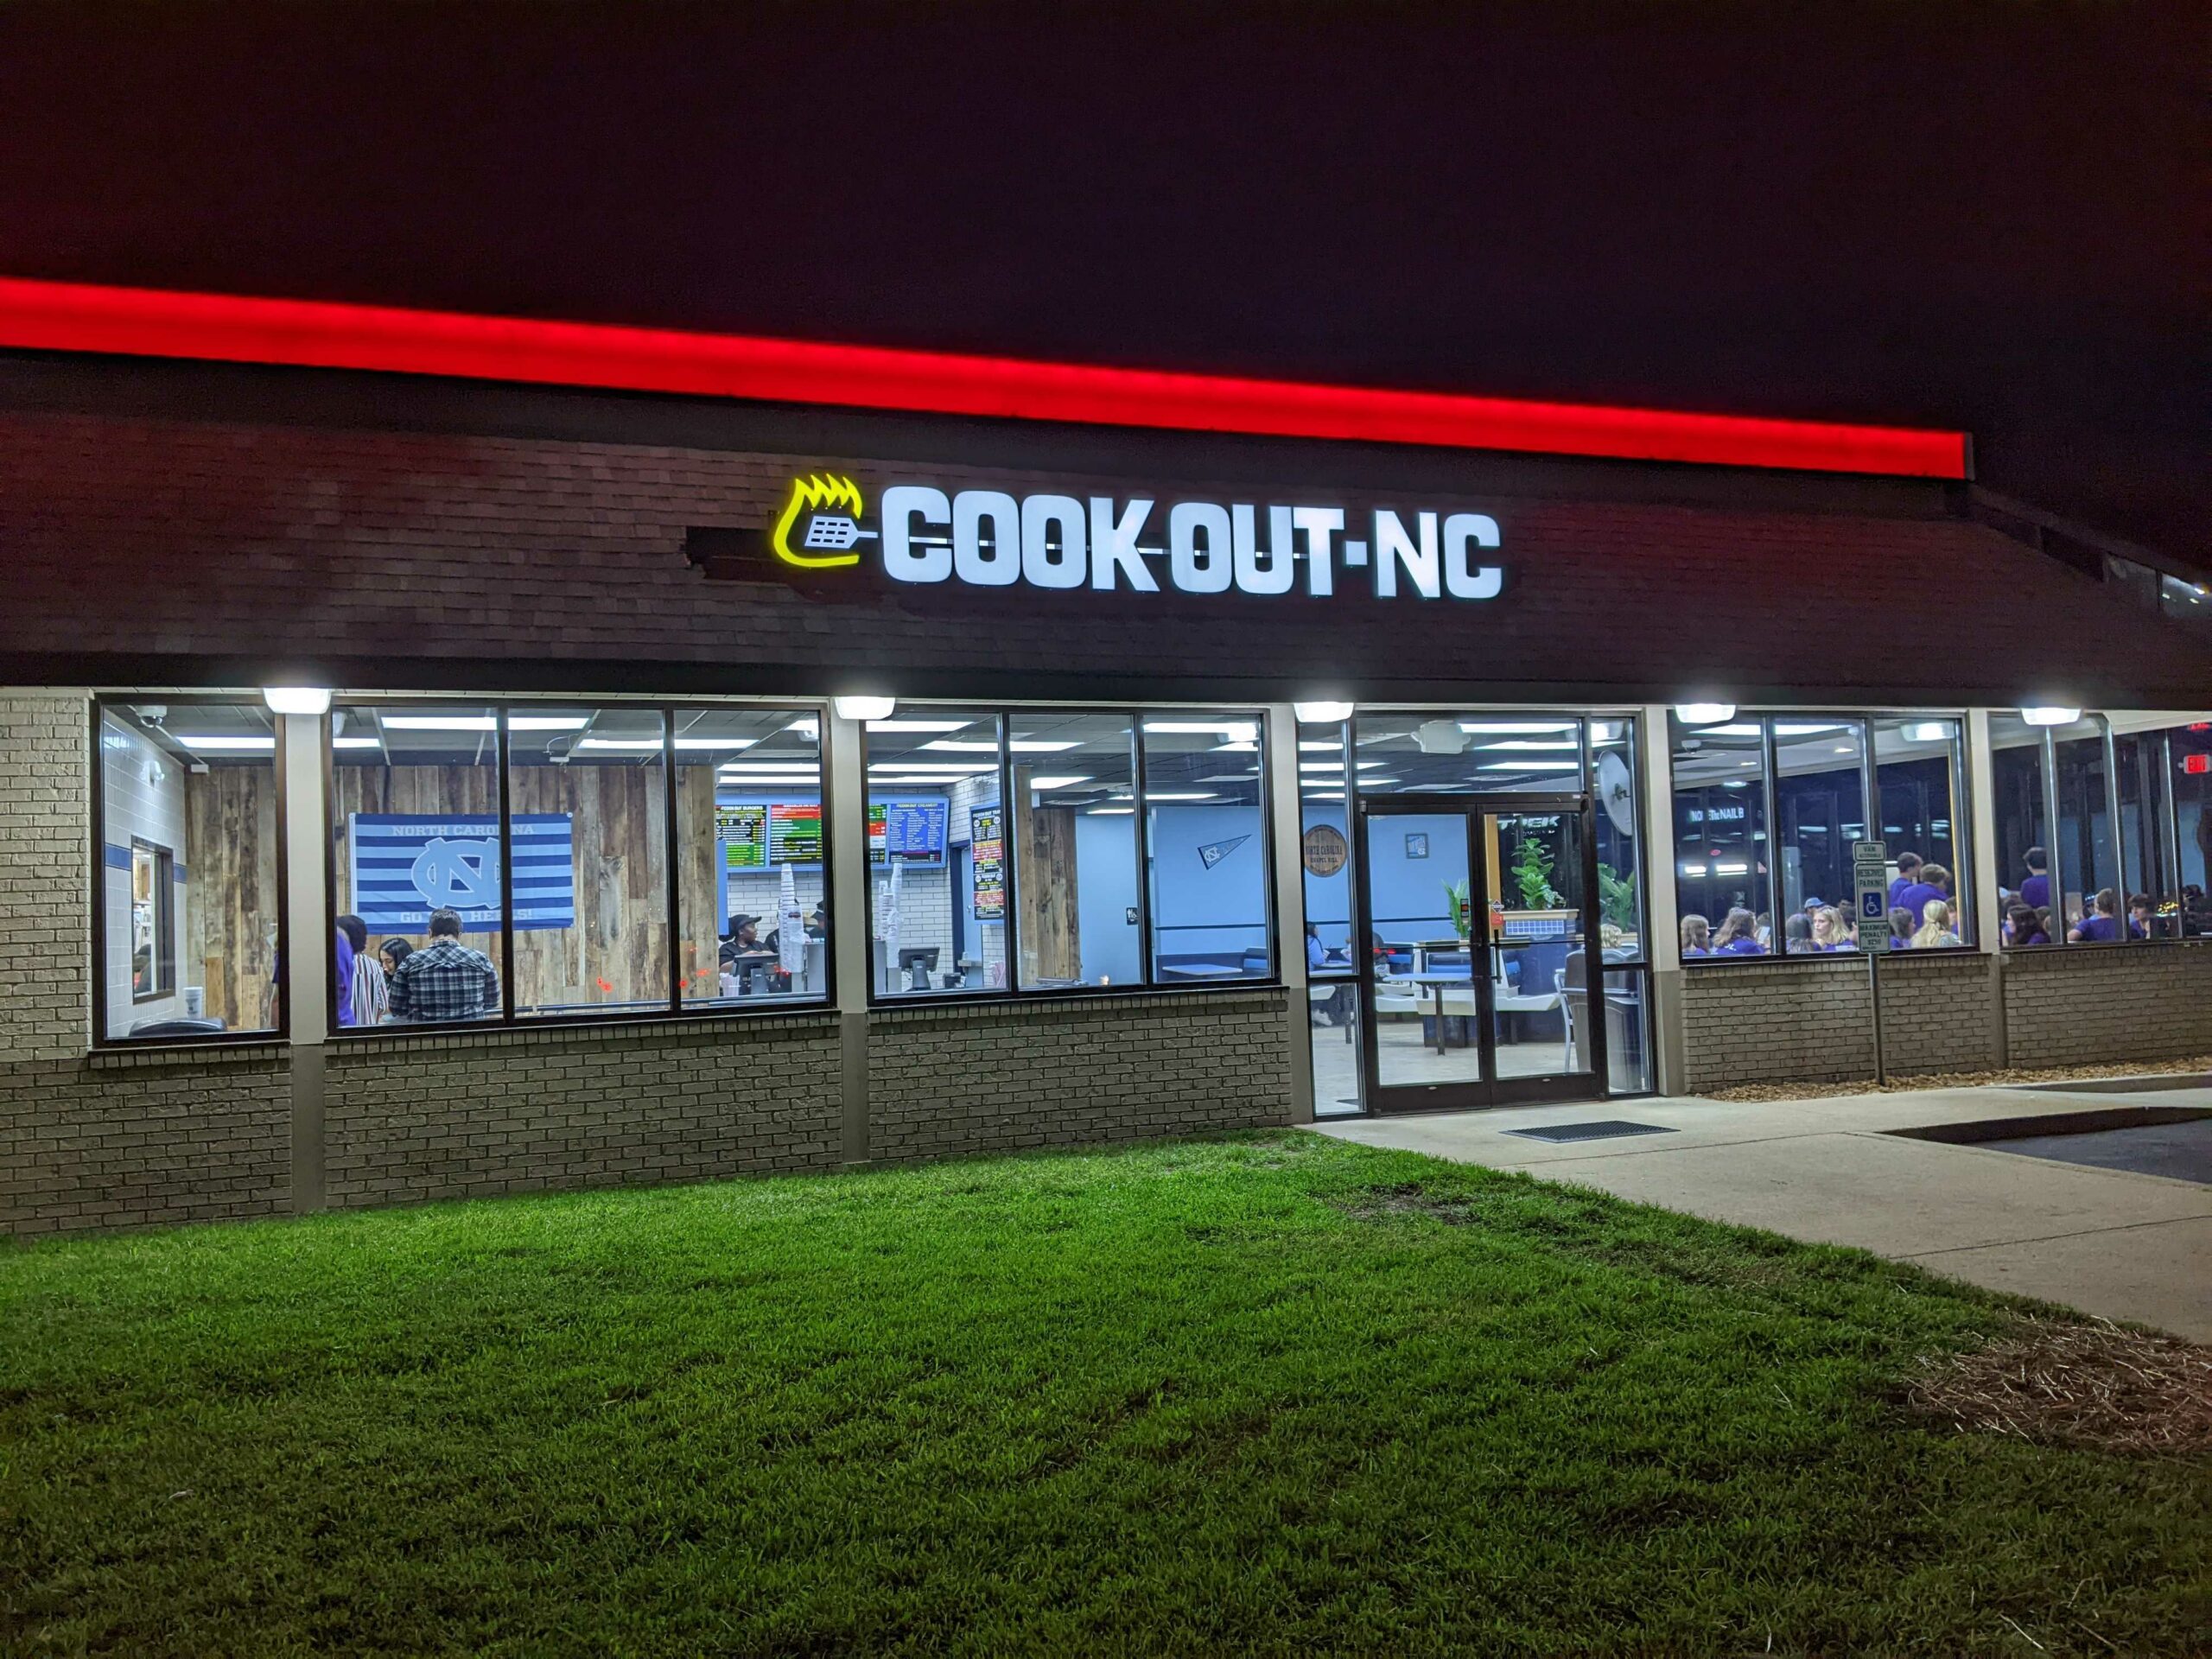 Popular Restaurant Chain Cook Out Opens Location in Chapel Hill